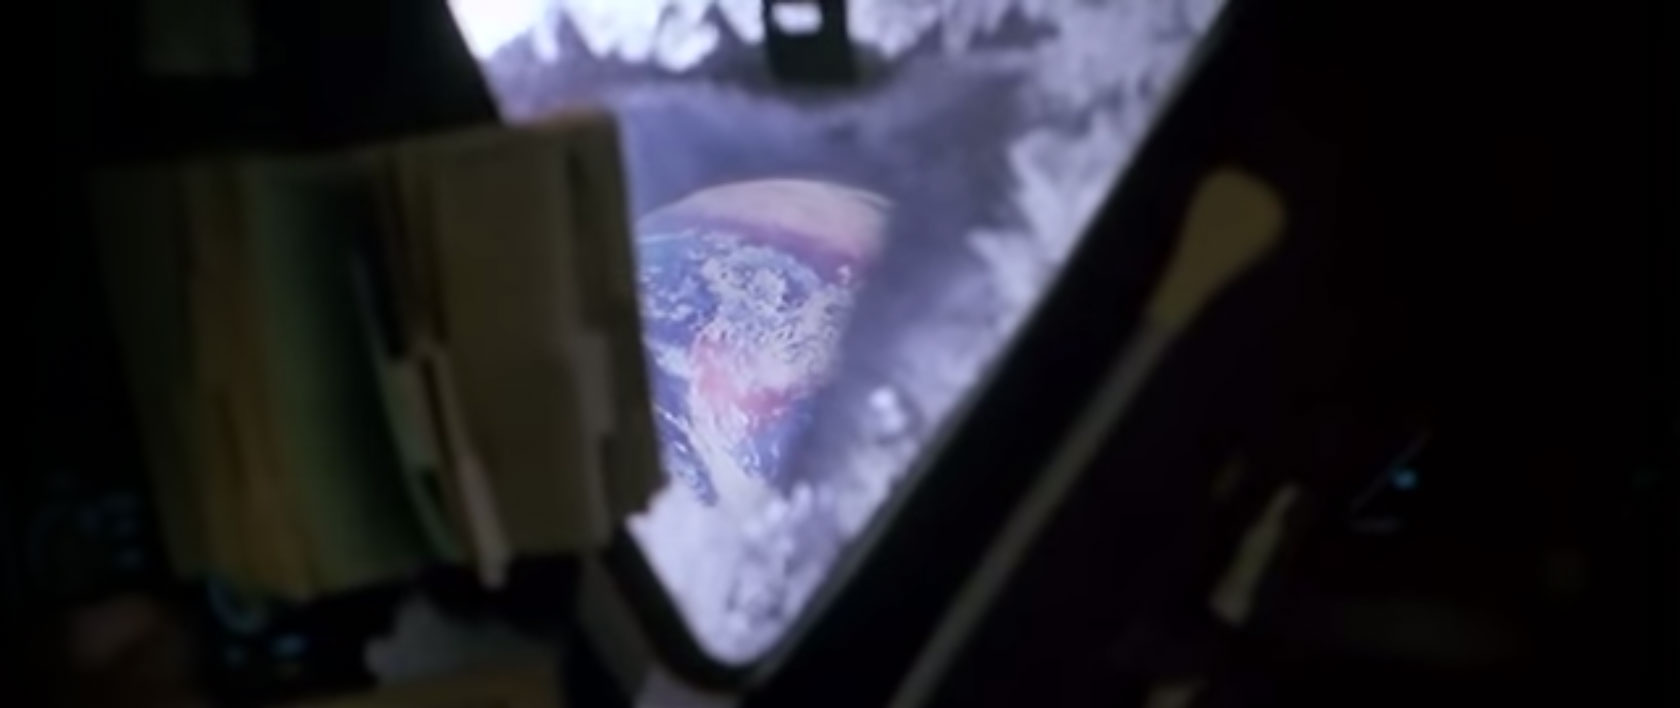 Earth as a reference, from Apollo 13